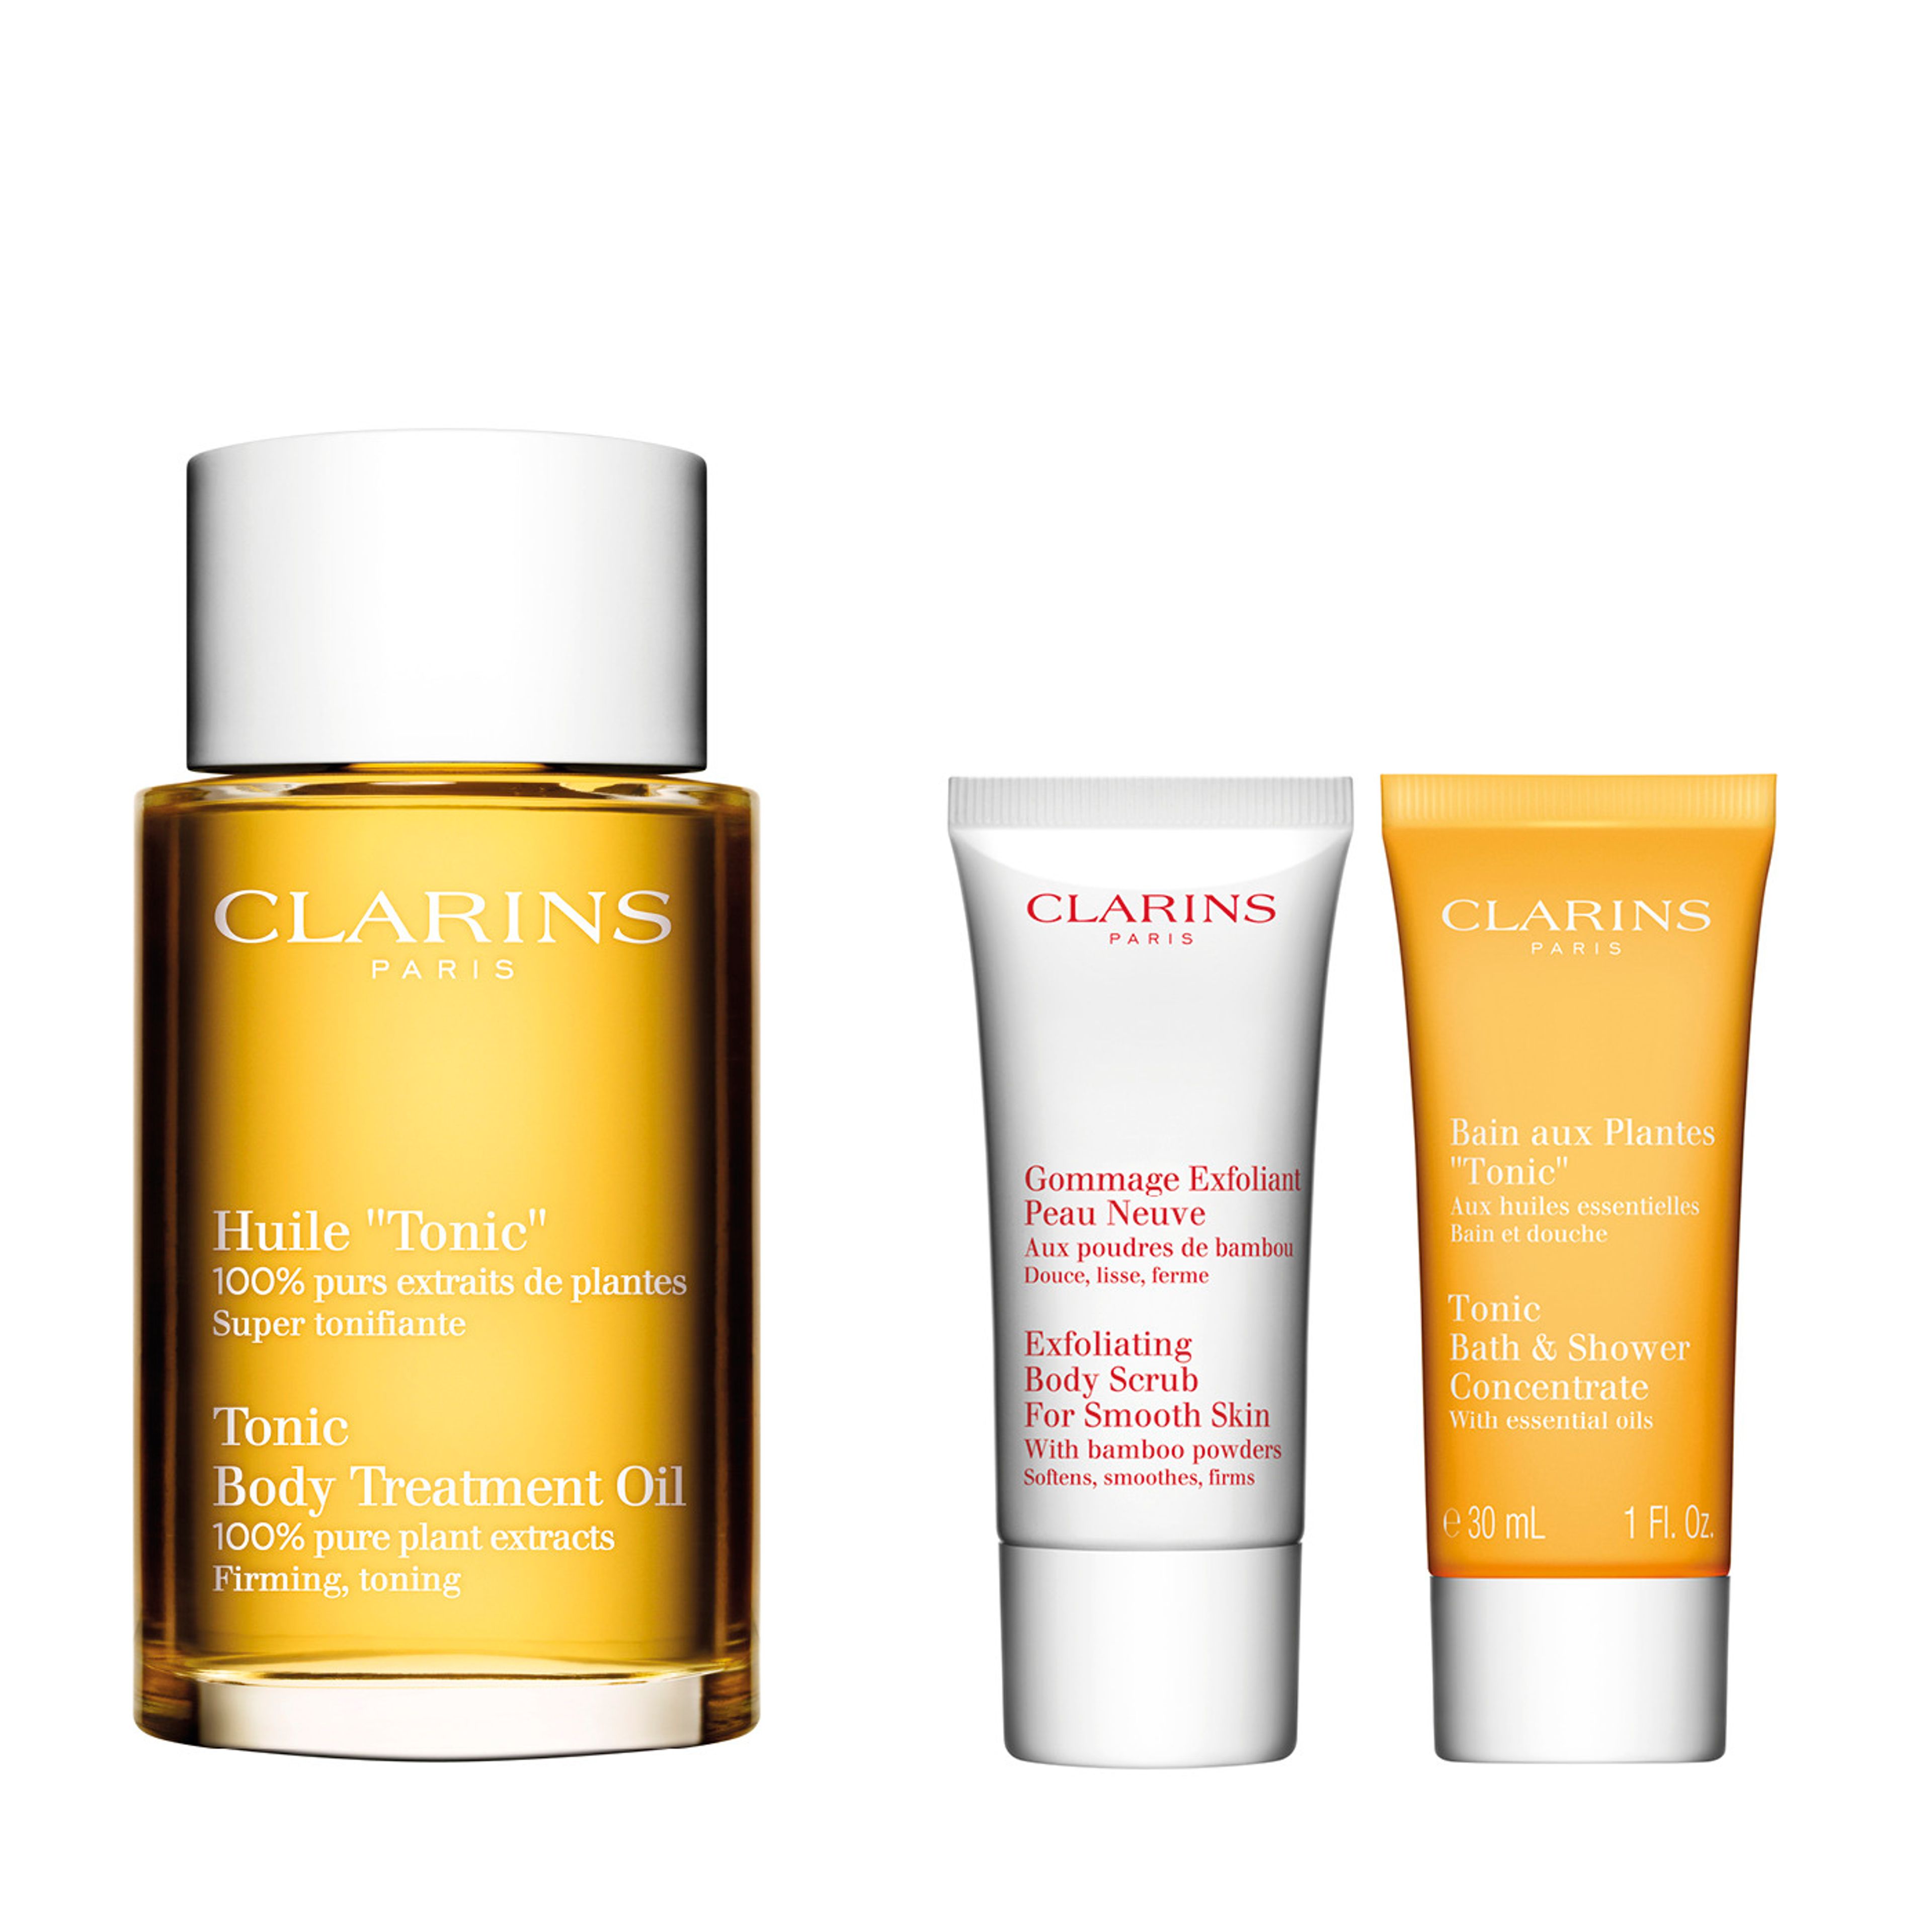 Spa @ Home Value Pack Clarins 3